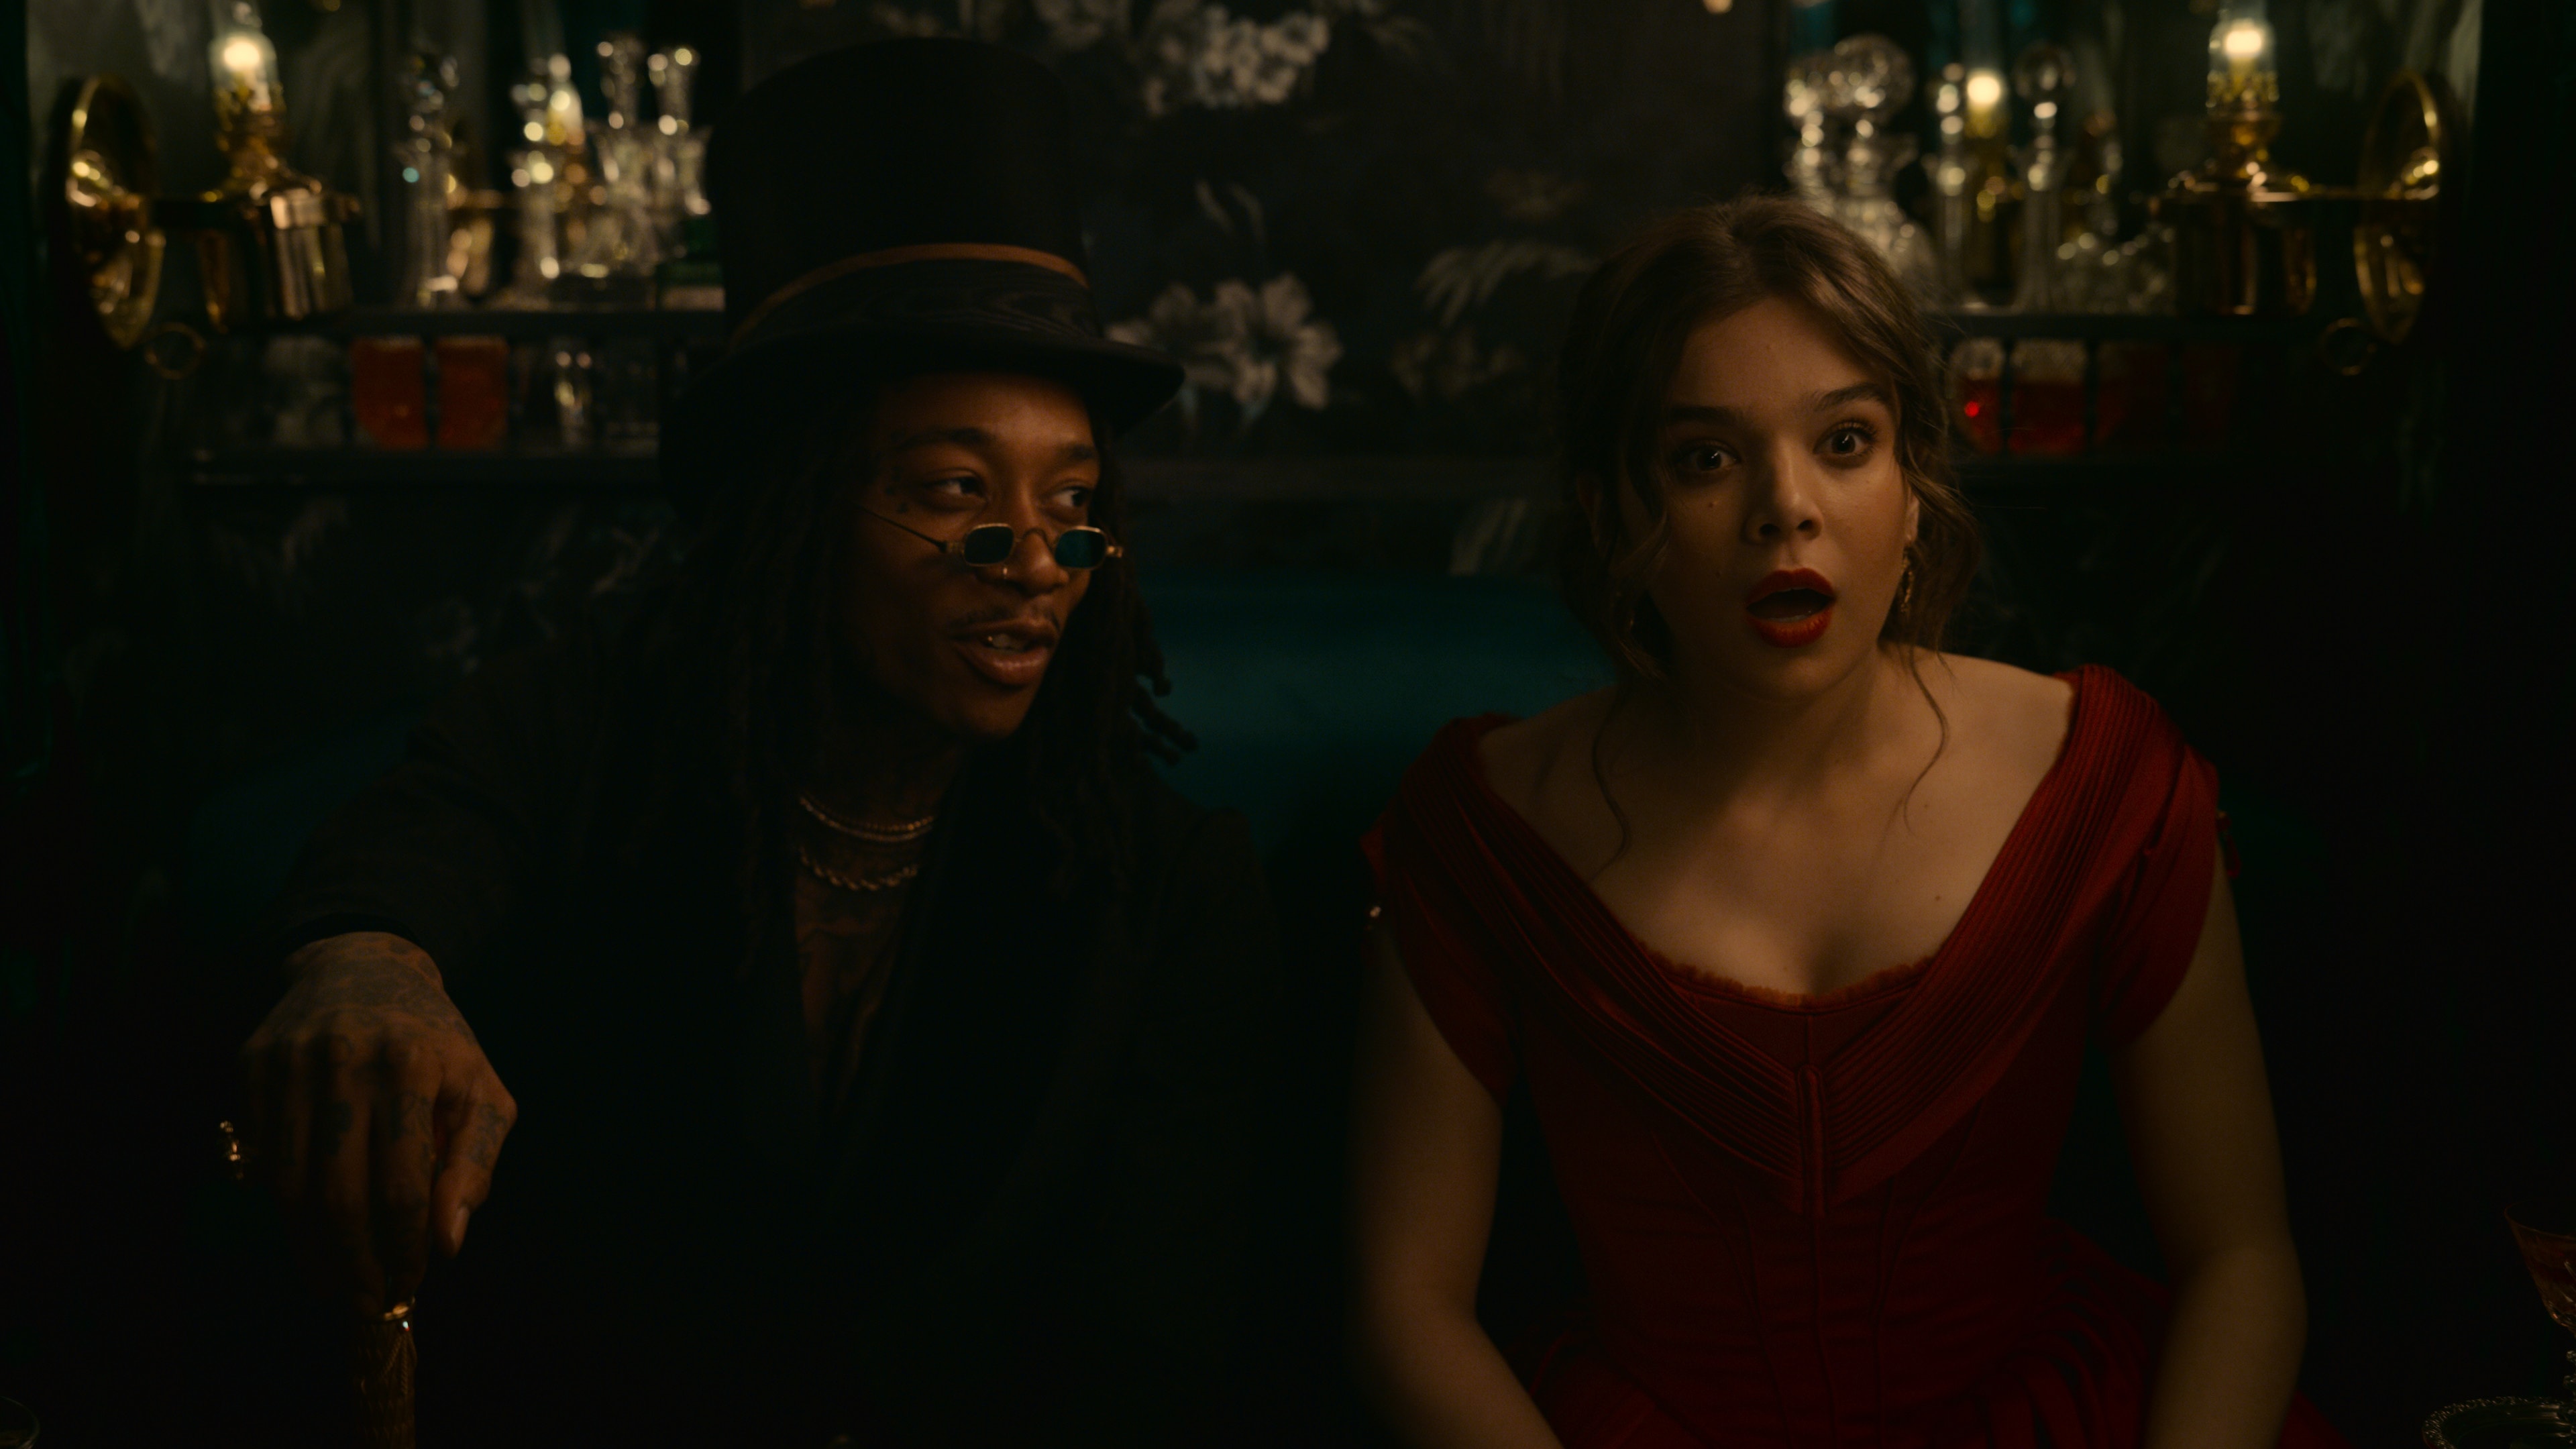 Death (played by Wiz Khalifa, left) is back to see Emily (Hailee Steinfeld) for some reason in Dickinson